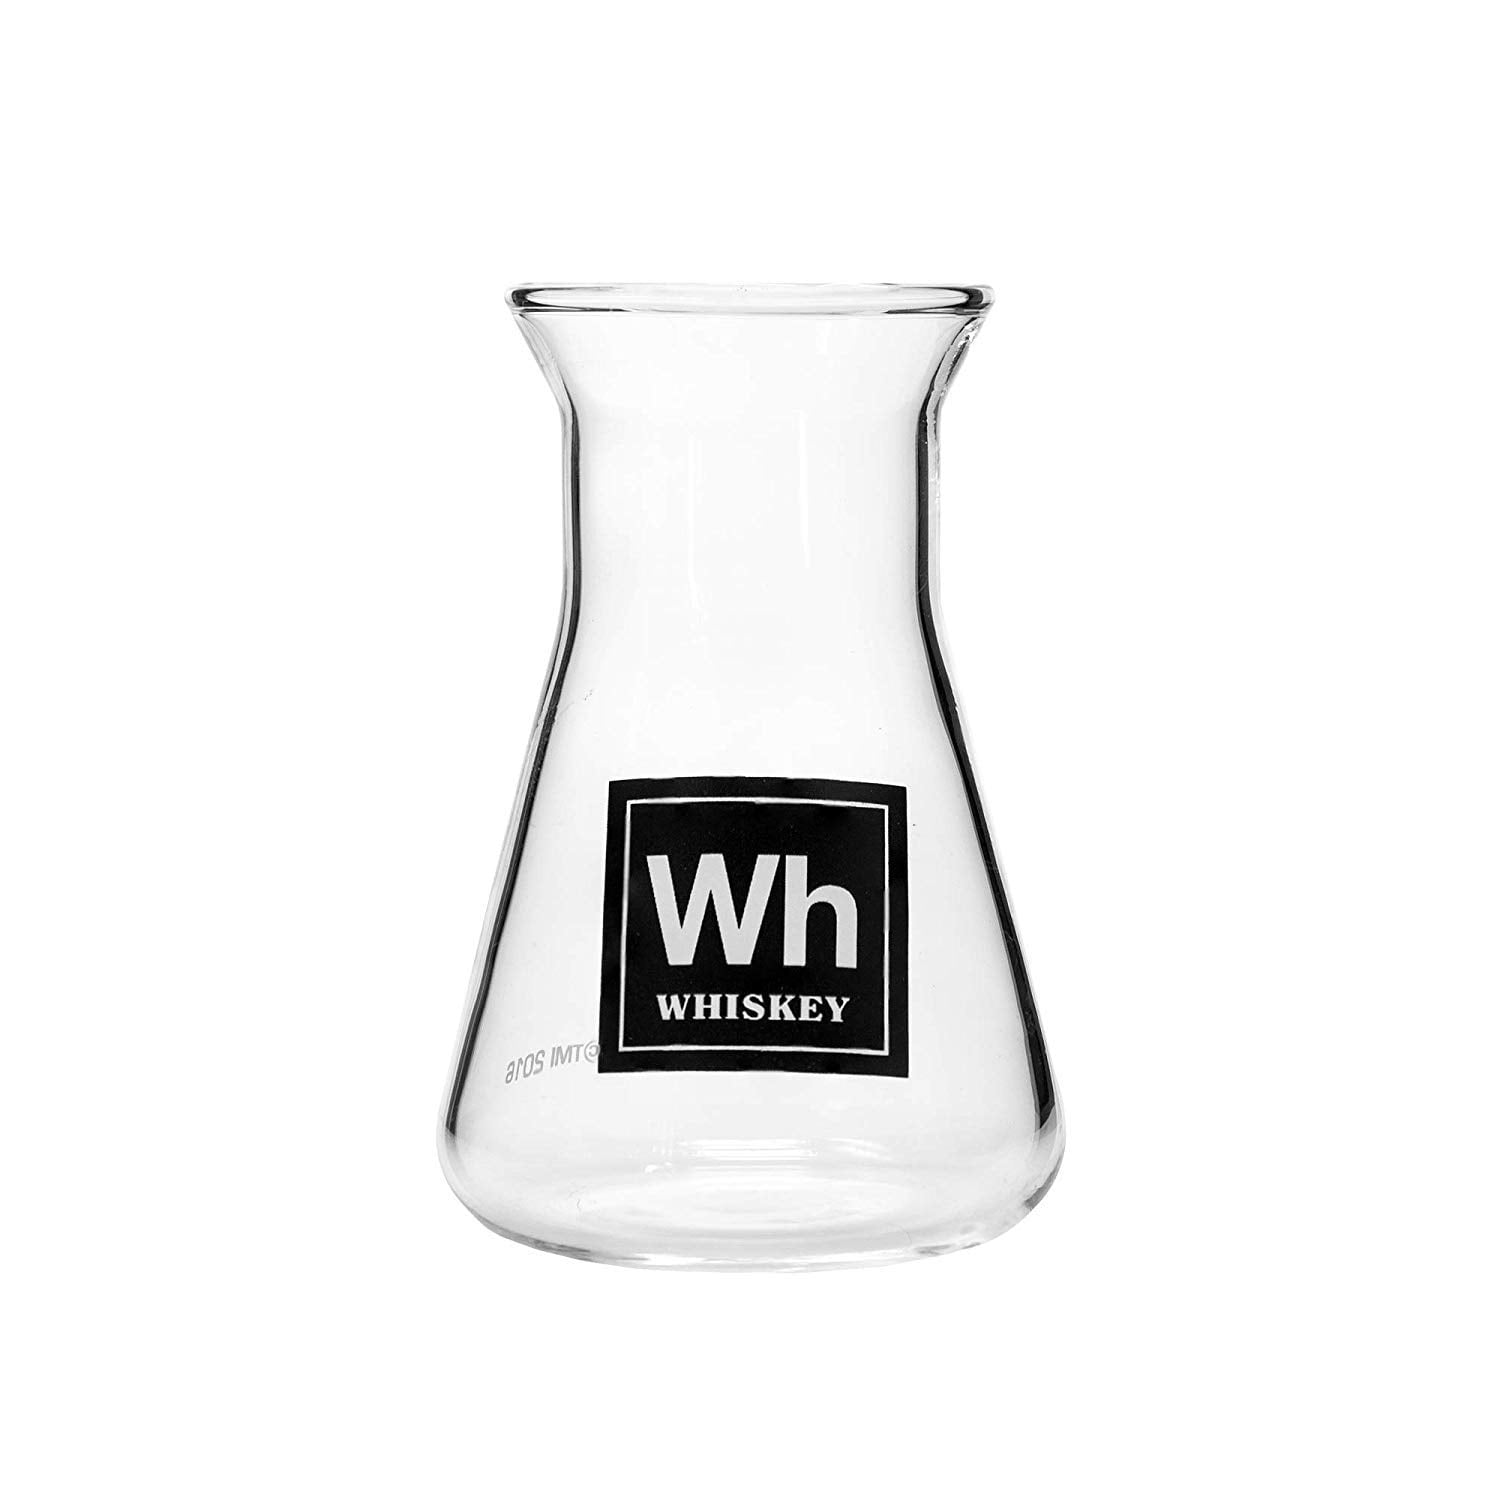 Drink Periodically Set of 6 Laboratory Erlenmeyer Flask Shot Glasses Clear Glass-2.75oz each 